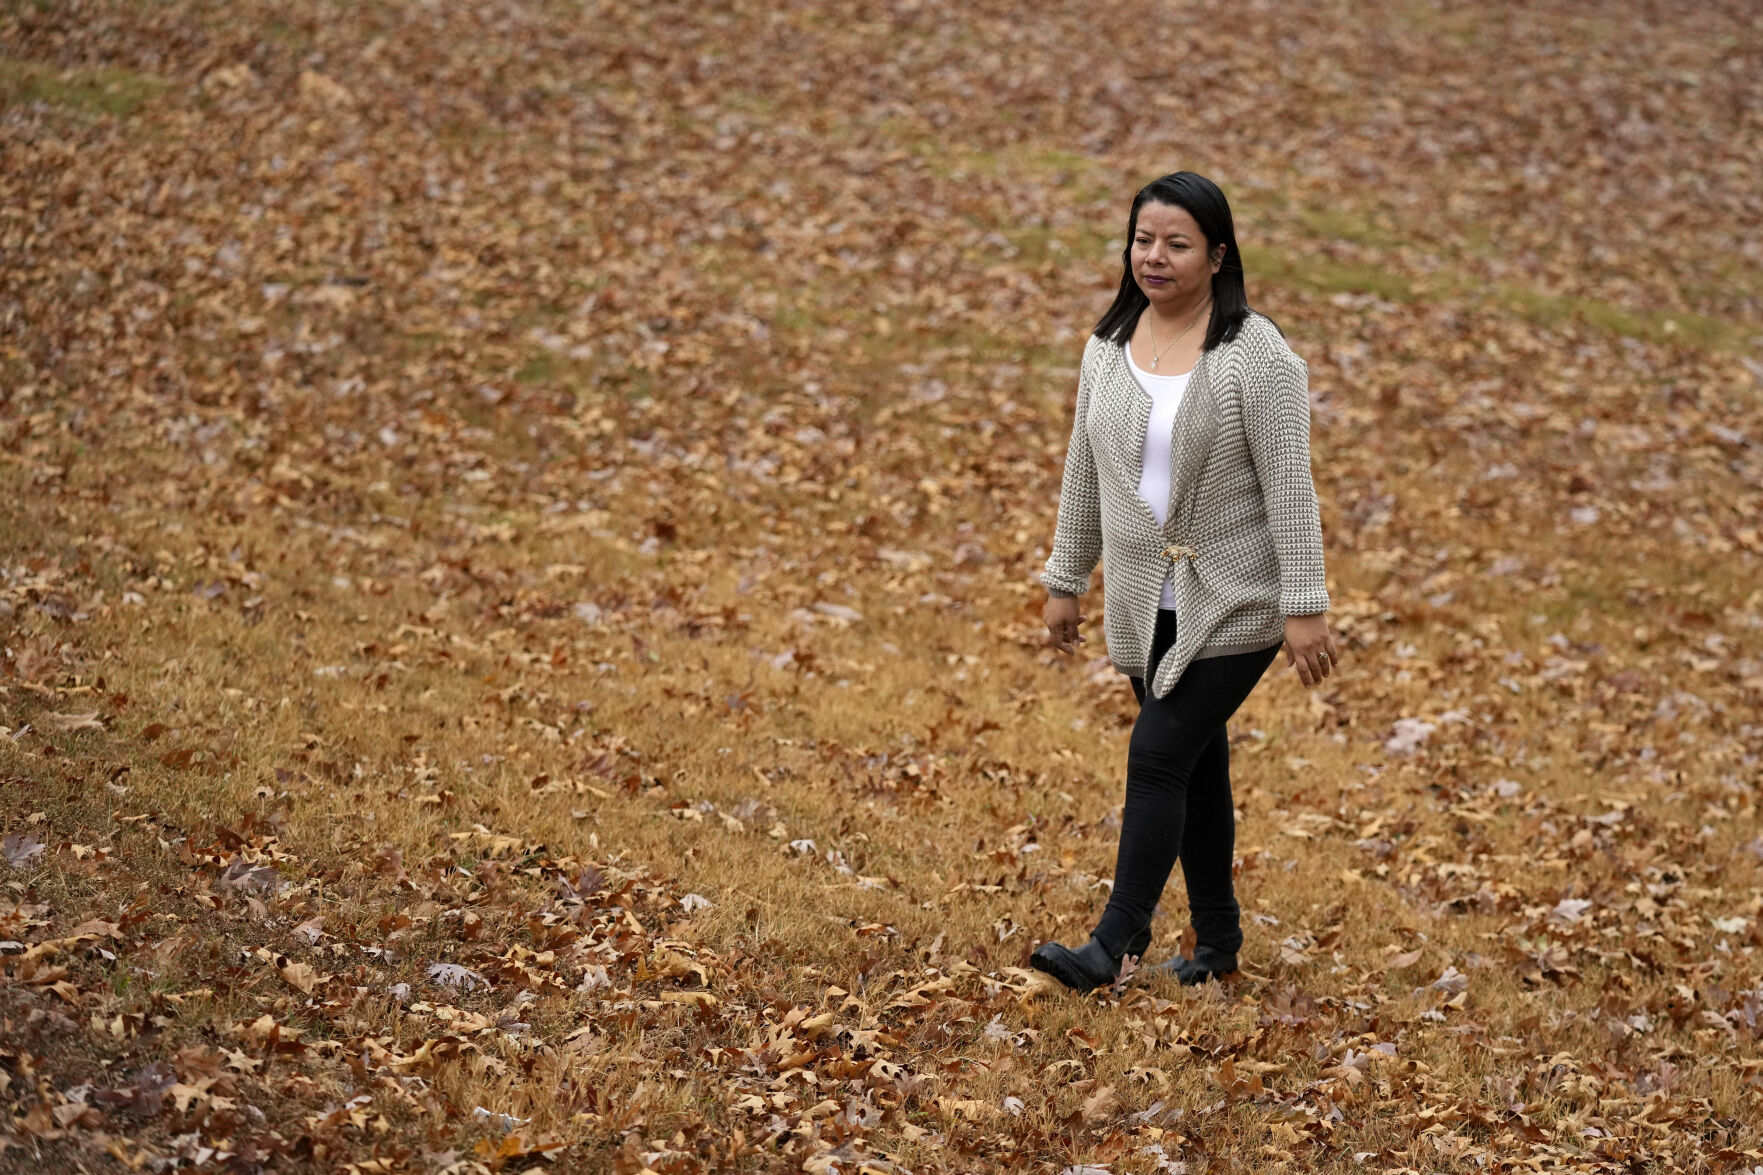 <p>Abi Suddarth walks through the leaves at Wyandotte County Lake, Friday, Nov. 4, 2022, in Kansas City, Kan. Suddarth is still undecided how she will vote in the upcoming election, citing divisiveness among political parties and a need for the country to find common ground. (AP Photo/Charlie Riedel)</p>   PHOTO CREDIT: Charlie Riedel - staff, AP